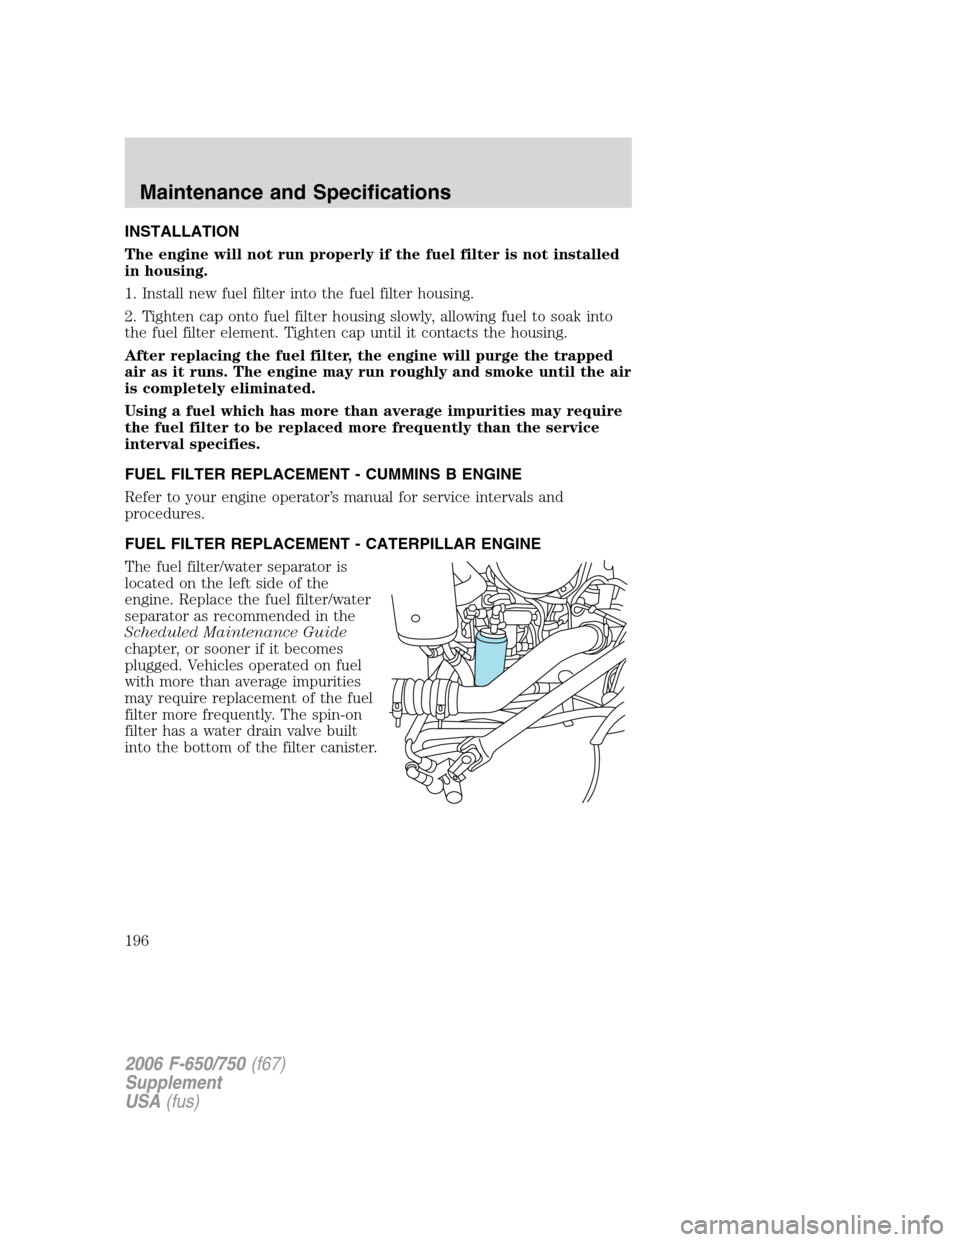 FORD F750 2006 11.G Service Manual INSTALLATION
The engine will not run properly if the fuel filter is not installed
in housing.
1. Install new fuel filter into the fuel filter housing.
2. Tighten cap onto fuel filter housing slowly, a